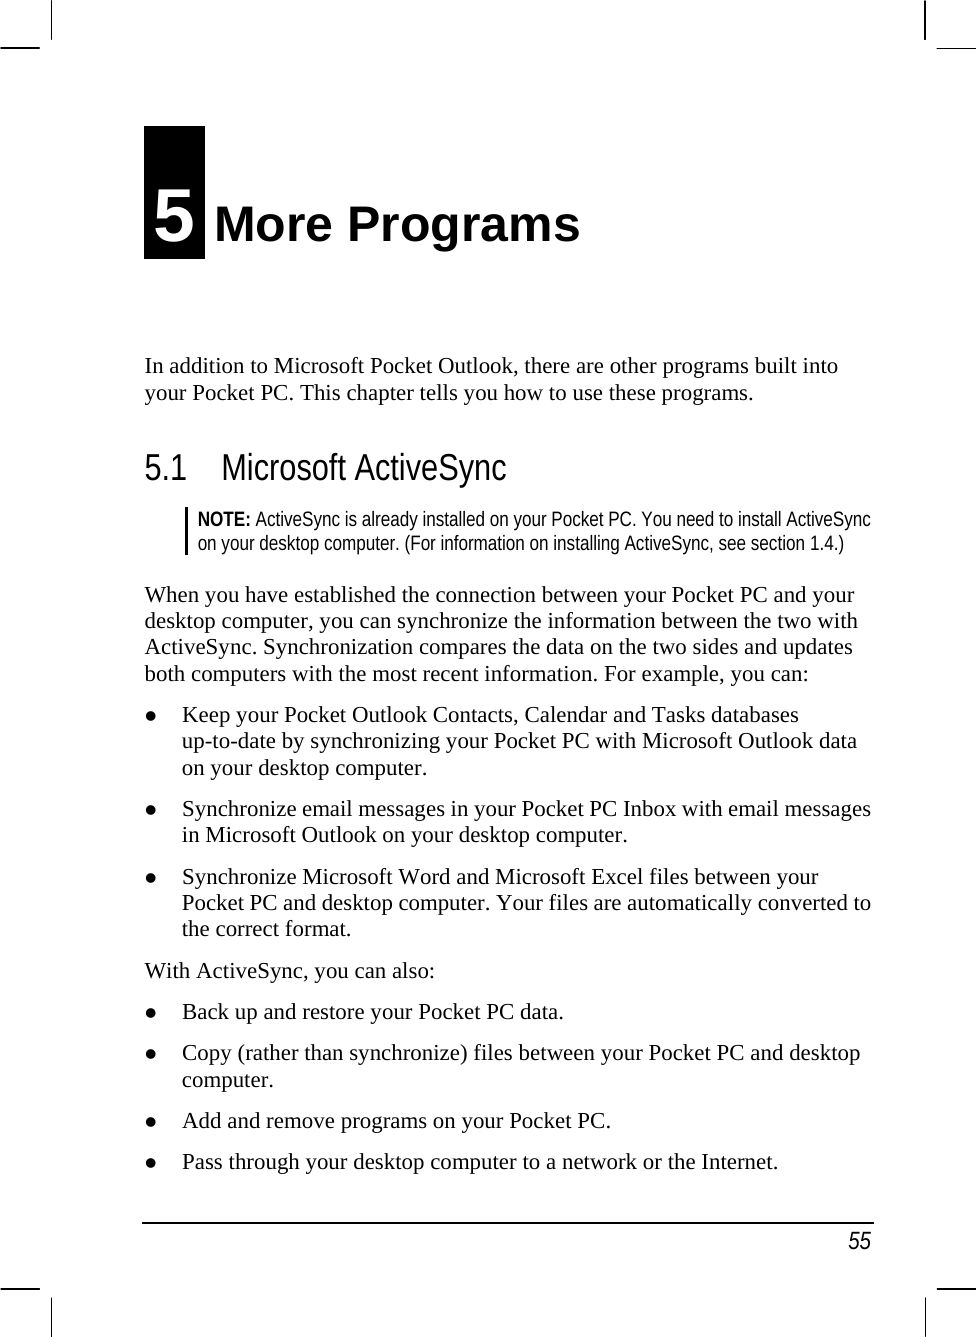   55 5 More Programs In addition to Microsoft Pocket Outlook, there are other programs built into your Pocket PC. This chapter tells you how to use these programs. 5.1 Microsoft ActiveSync NOTE: ActiveSync is already installed on your Pocket PC. You need to install ActiveSync on your desktop computer. (For information on installing ActiveSync, see section 1.4.)  When you have established the connection between your Pocket PC and your desktop computer, you can synchronize the information between the two with ActiveSync. Synchronization compares the data on the two sides and updates both computers with the most recent information. For example, you can: z Keep your Pocket Outlook Contacts, Calendar and Tasks databases up-to-date by synchronizing your Pocket PC with Microsoft Outlook data on your desktop computer. z Synchronize email messages in your Pocket PC Inbox with email messages in Microsoft Outlook on your desktop computer. z Synchronize Microsoft Word and Microsoft Excel files between your Pocket PC and desktop computer. Your files are automatically converted to the correct format. With ActiveSync, you can also: z Back up and restore your Pocket PC data. z Copy (rather than synchronize) files between your Pocket PC and desktop computer. z Add and remove programs on your Pocket PC. z Pass through your desktop computer to a network or the Internet. 